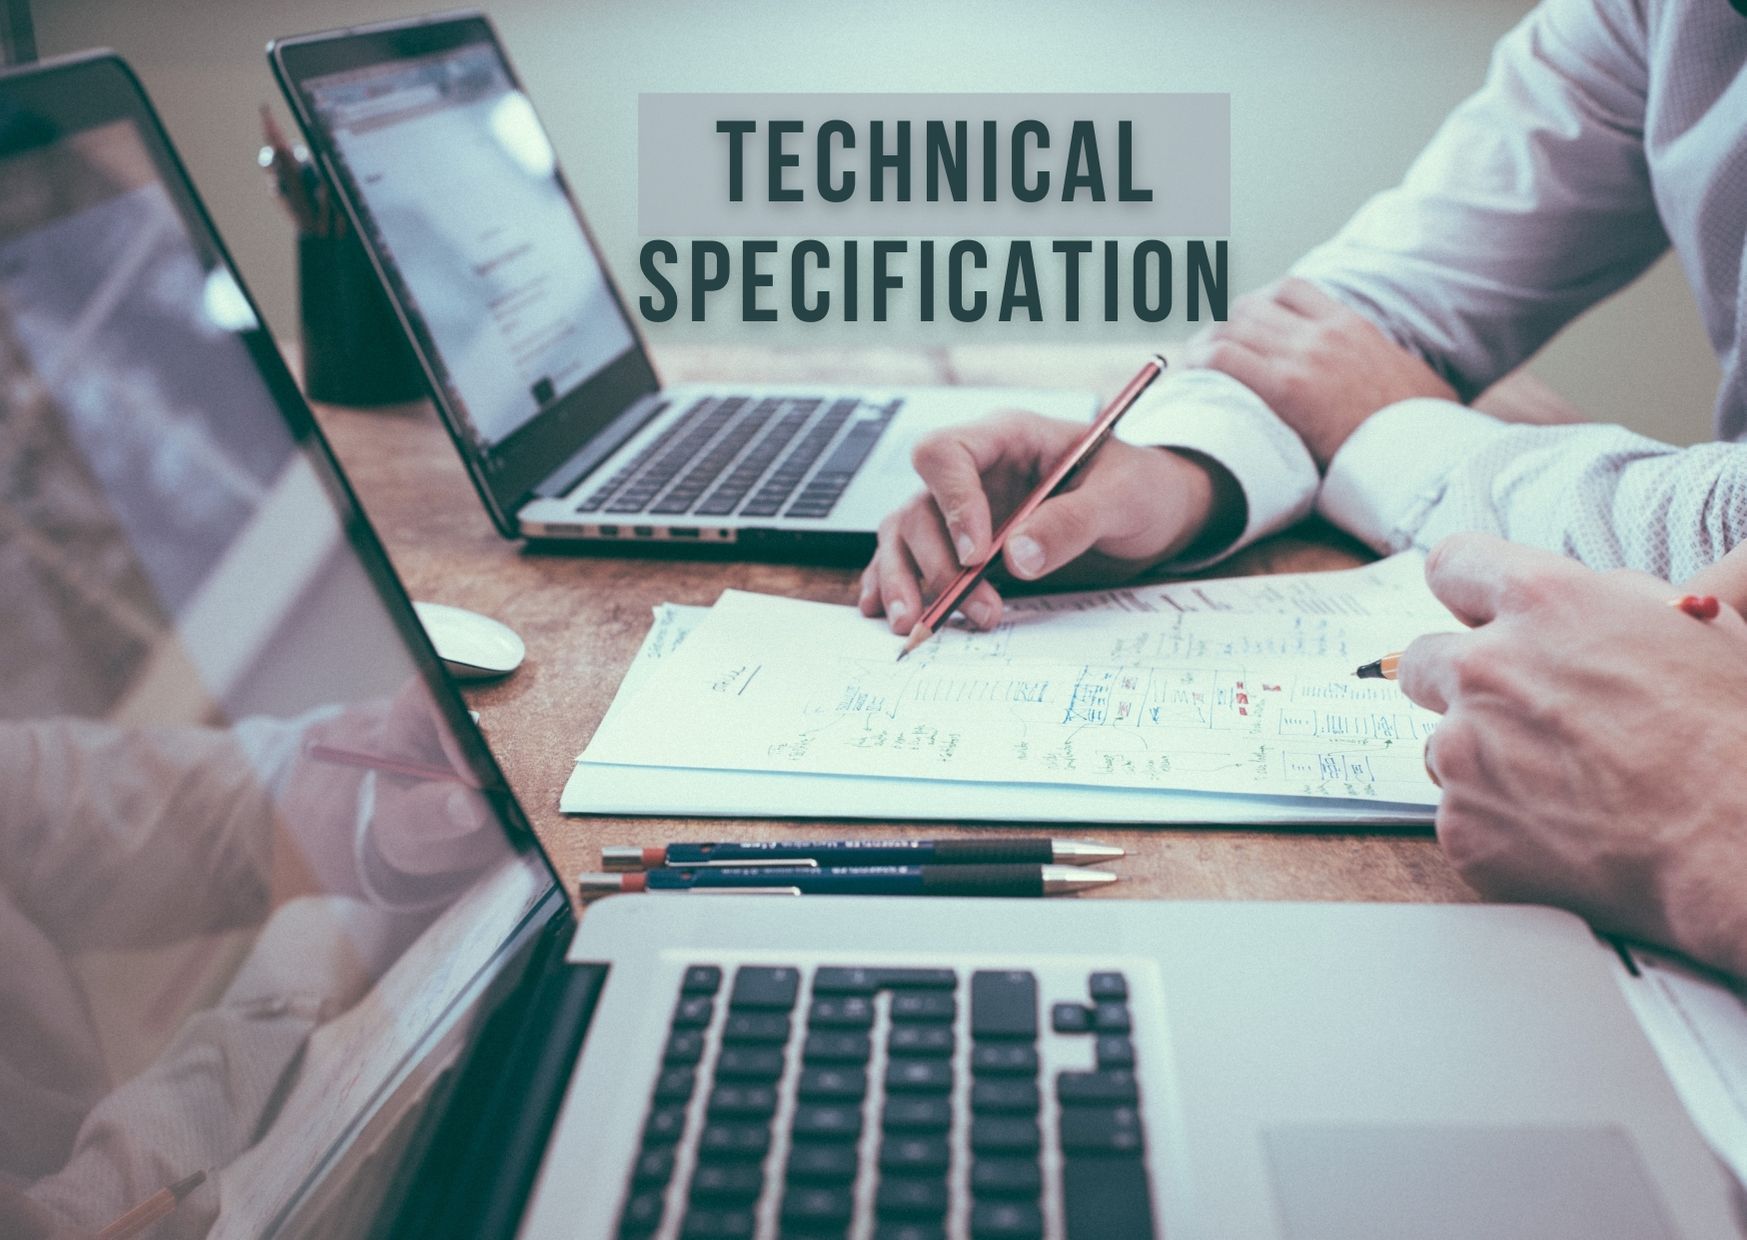 Technical specification